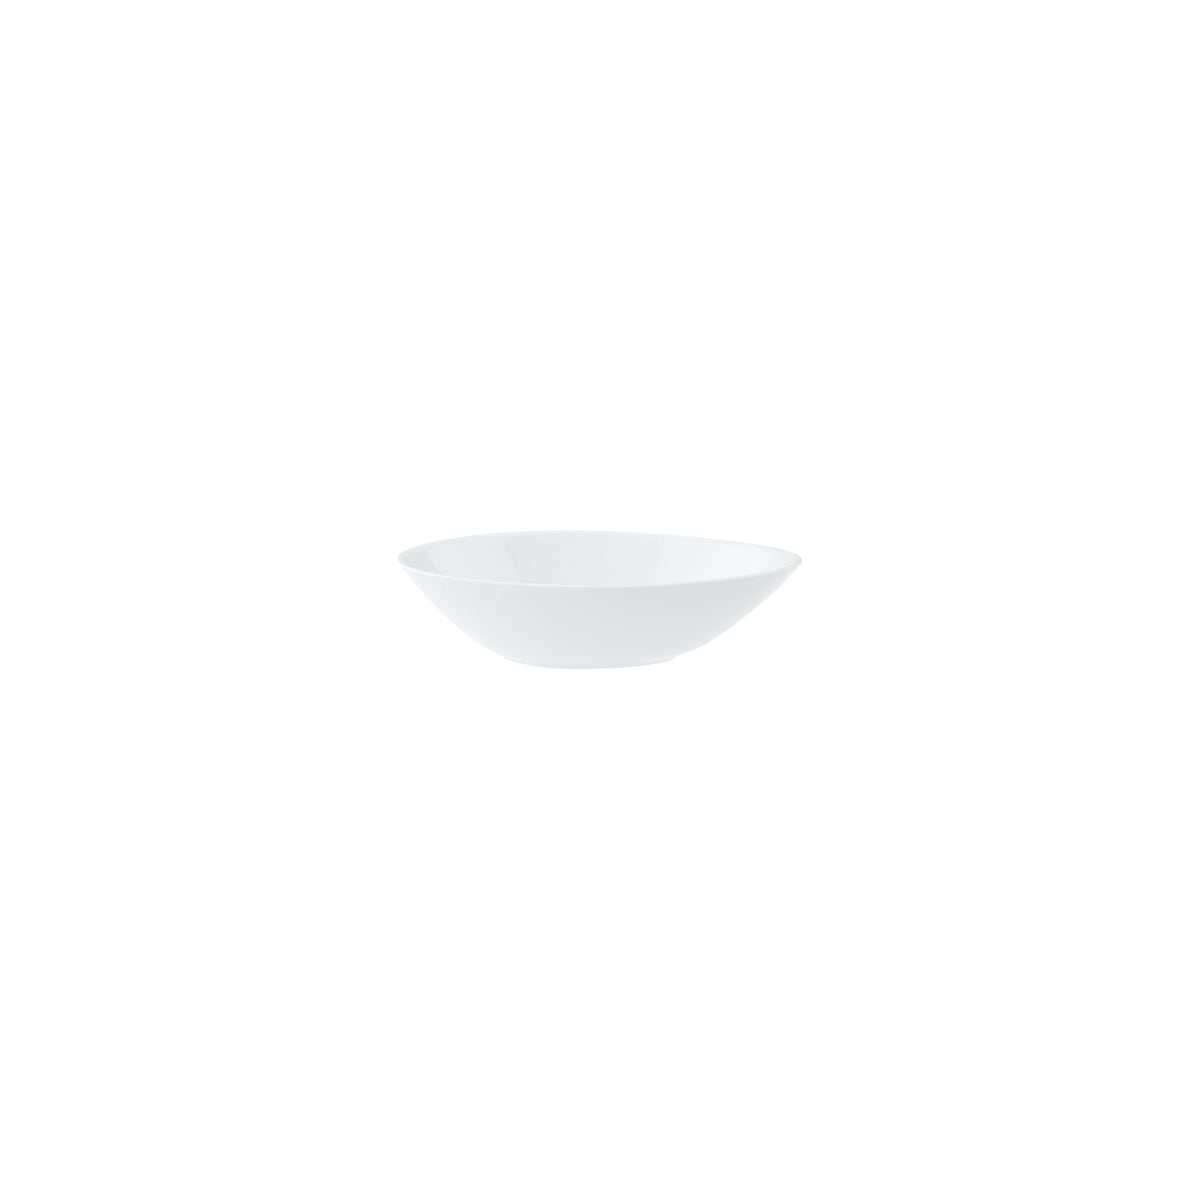 VB16-3275-3869 Villeroy And Boch Villeroy And Boch Marchesi White Oval Bowl 190x130mm / 350ml Tomkin Australia Hospitality Supplies